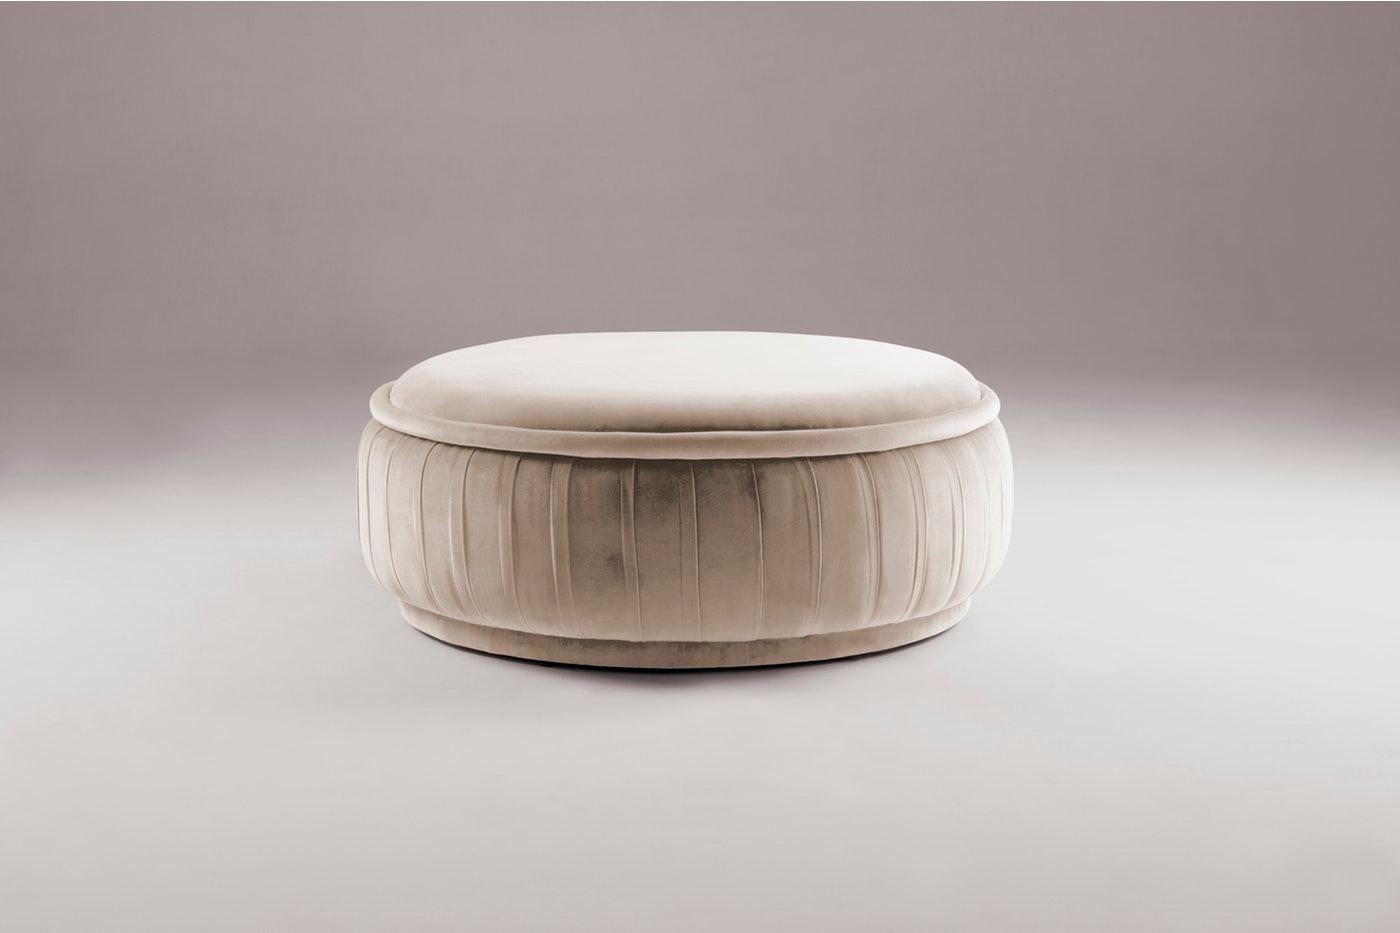 Malibu Pouf by Dooq
Ø 100 cm 39”
H 35 cm 14”

Materials: upholstery and piping fabric or leather

Dooq is a design company dedicated to celebrate the luxury of living. Creating designs that stimulate the senses, whose conceptual approach is